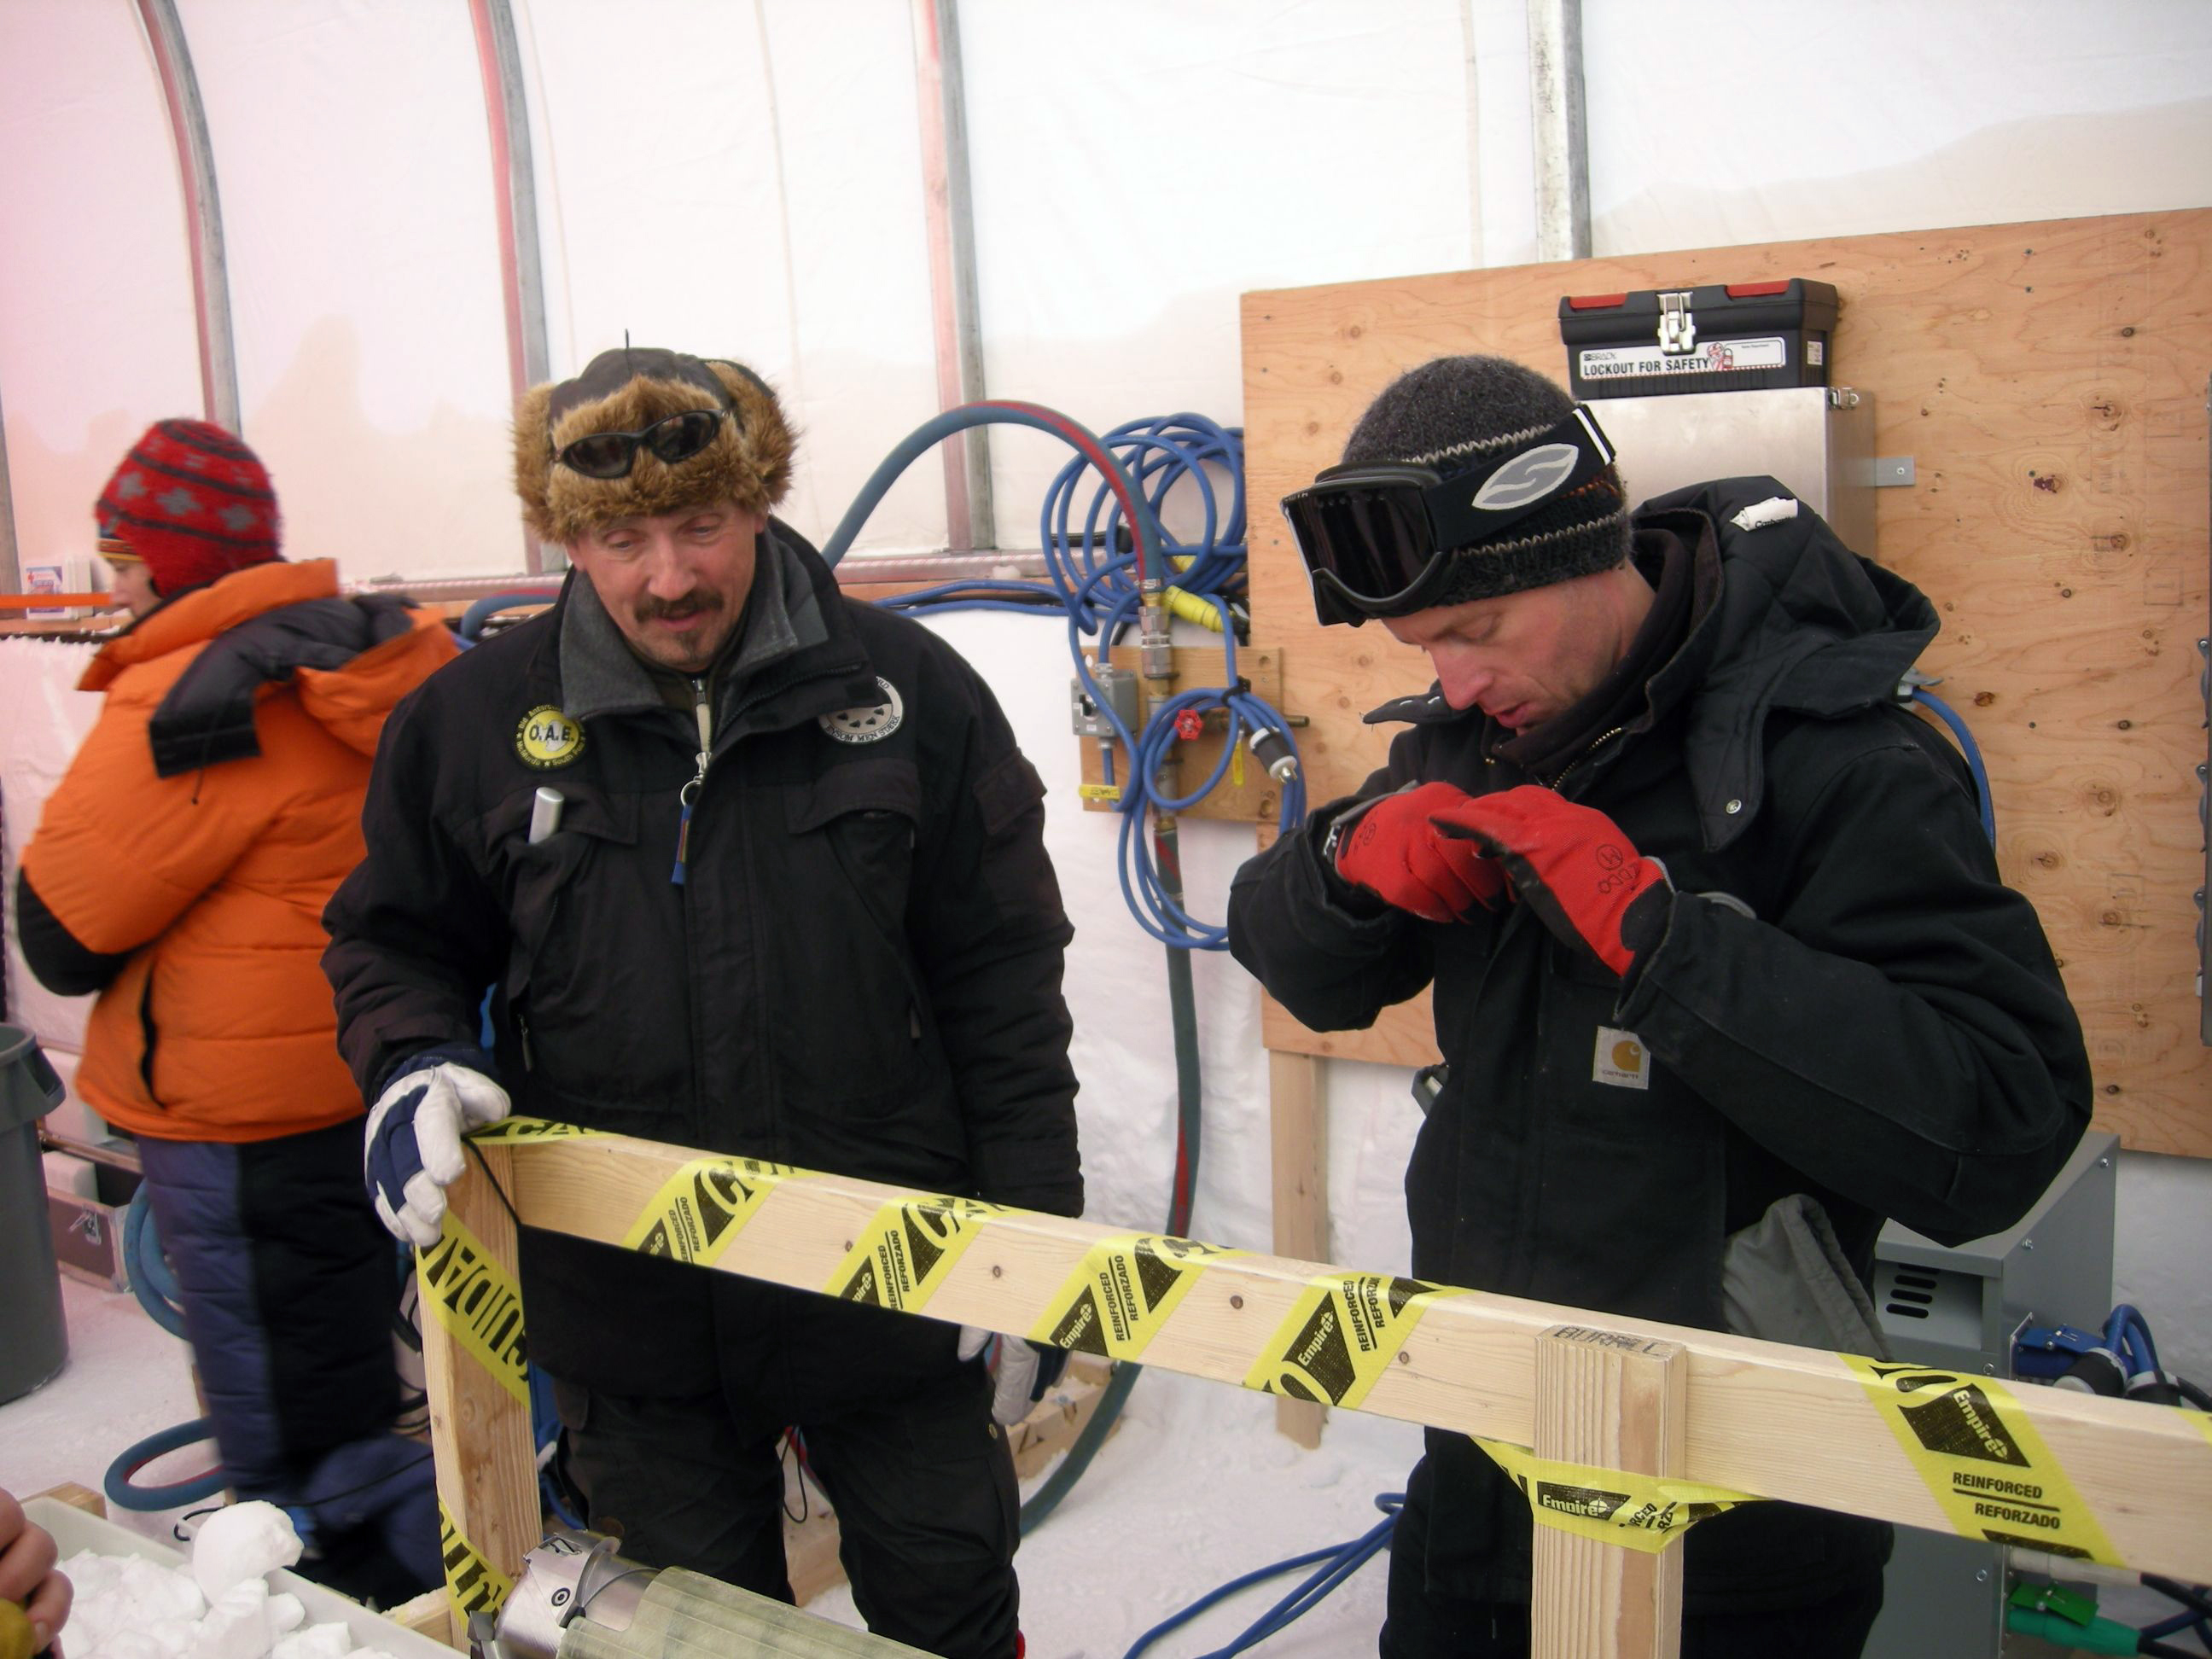 Jay Johnson, drilling engineer for Ice Drilling Design and Operations group at the University of Wisconsin-Madison (right) discussing the drill operations with Steffen Bo Hansen from the Centre for Ice and Climate, Copenhagen